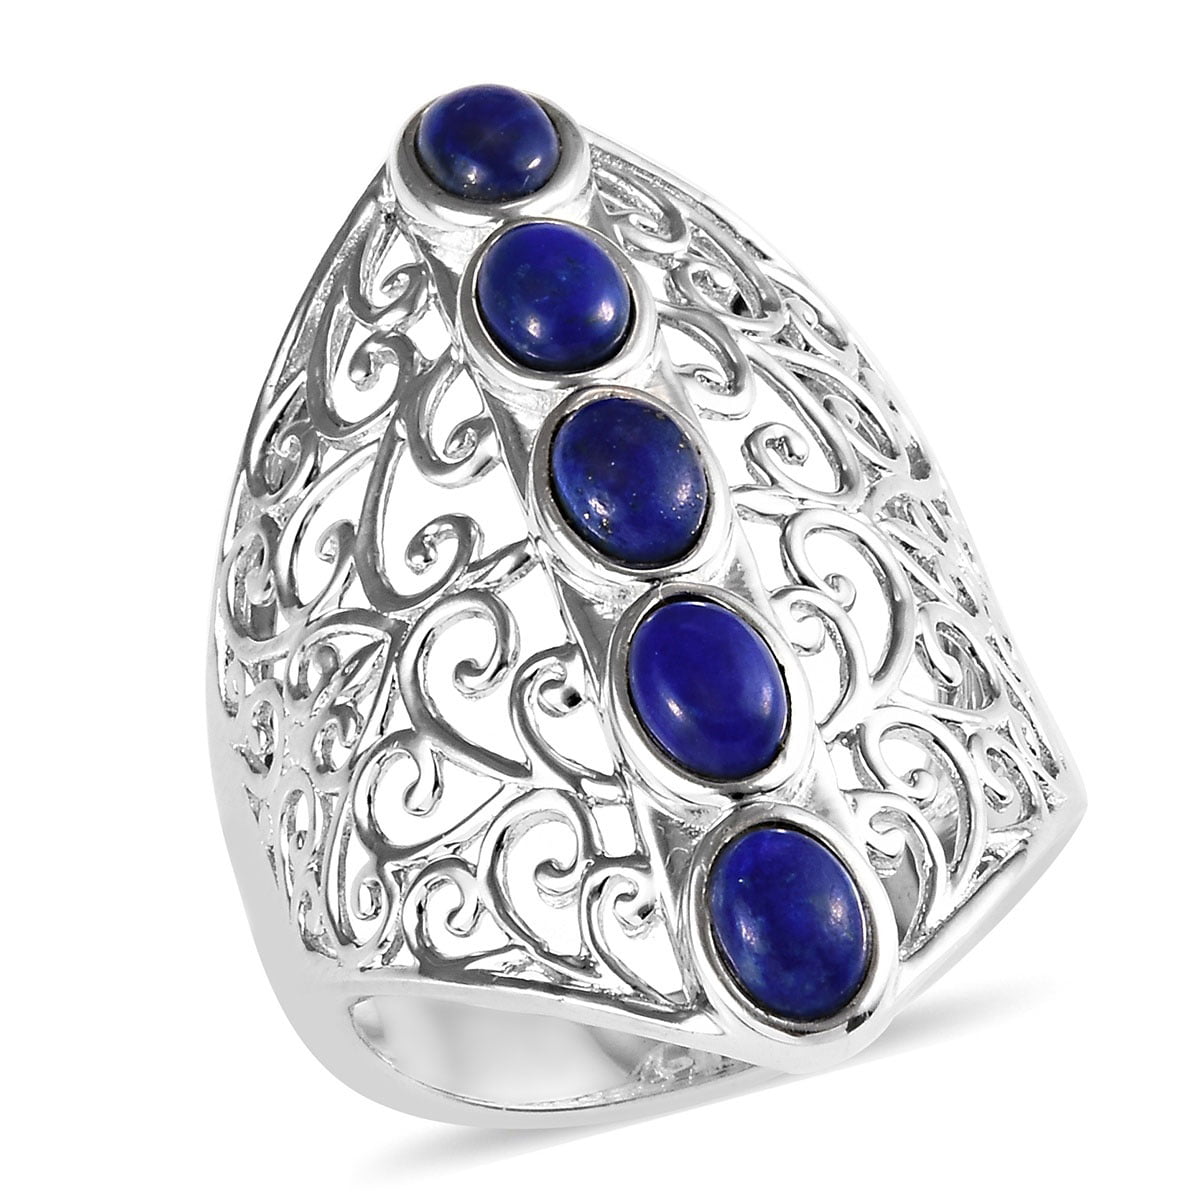 925 Sterling Silver Oval Lapis Lazuli Oxidized Statement Ring for Women Handmade Jewelry Size 6 Cttw 2 